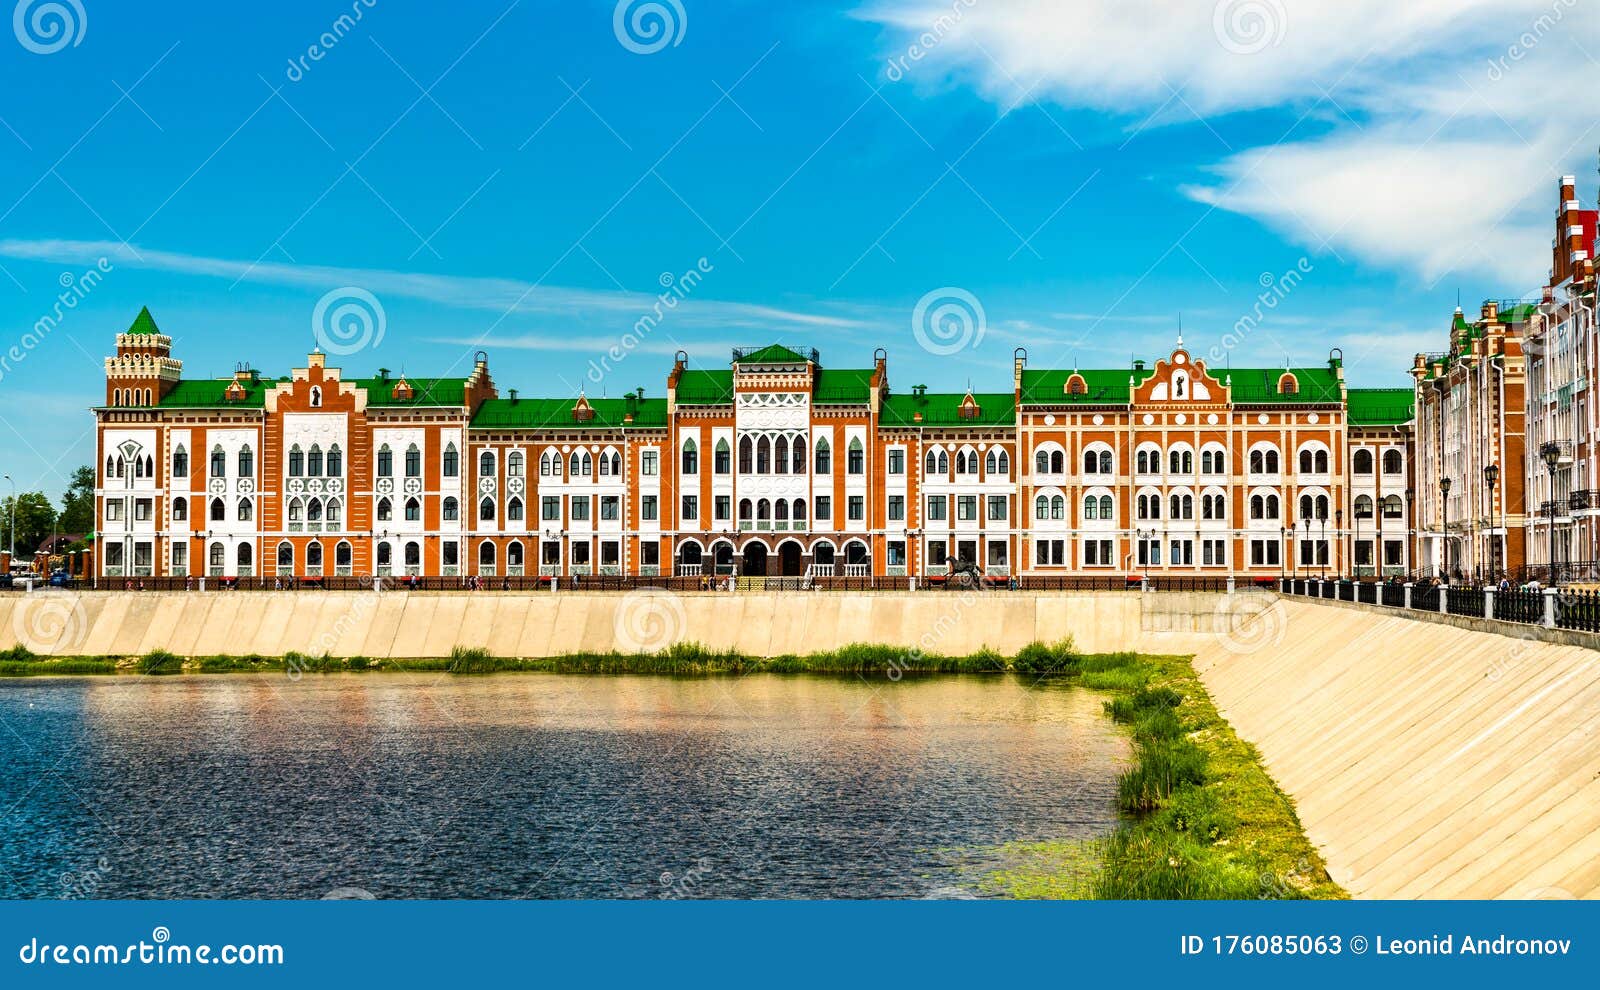 houses at the embankment of yoshkar-ola in russia